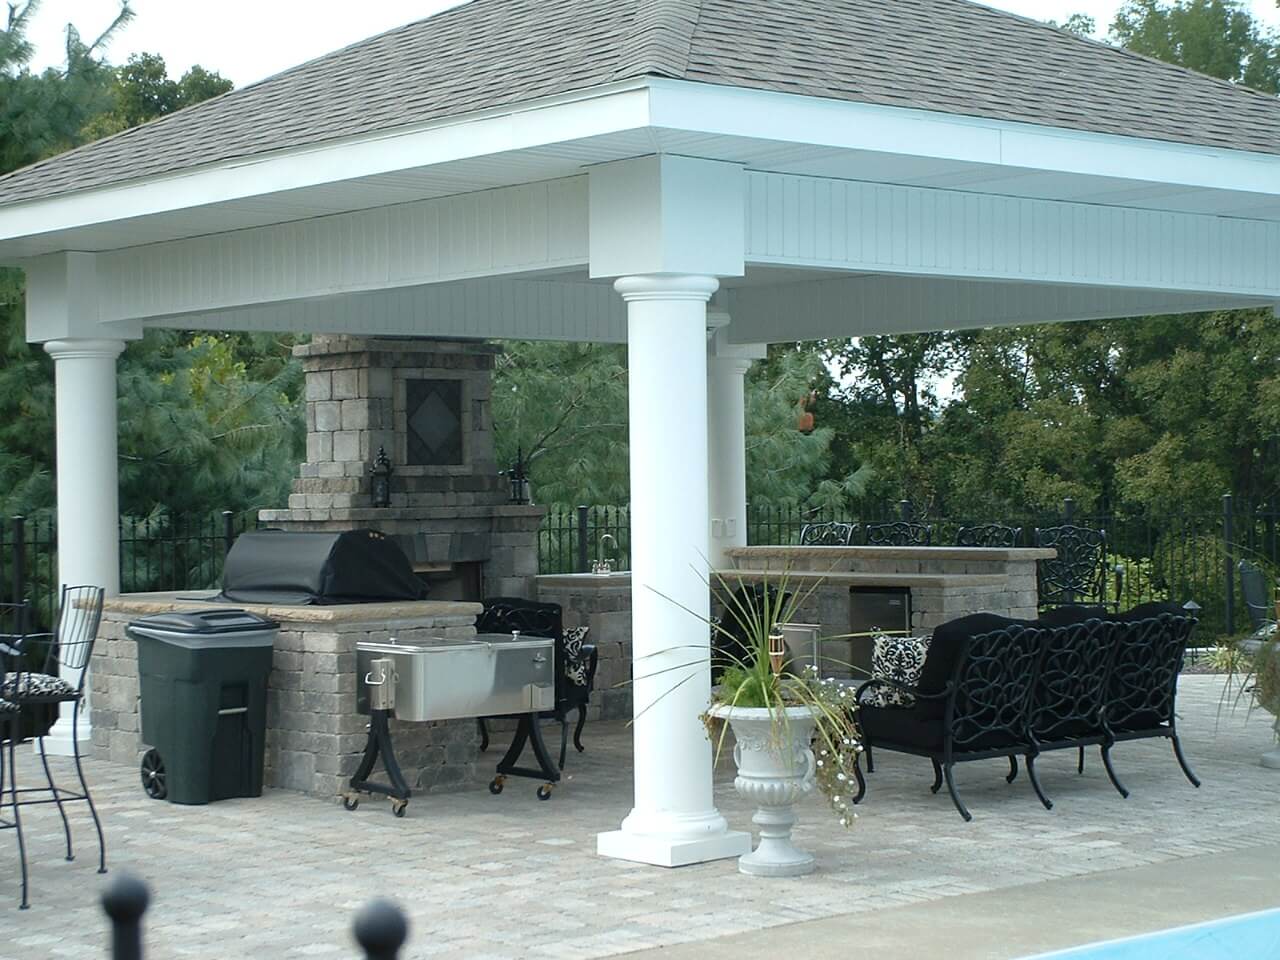 outdoor living - natural stone party area with bbq, fireplace and bar Cape Girardeau, MO Project